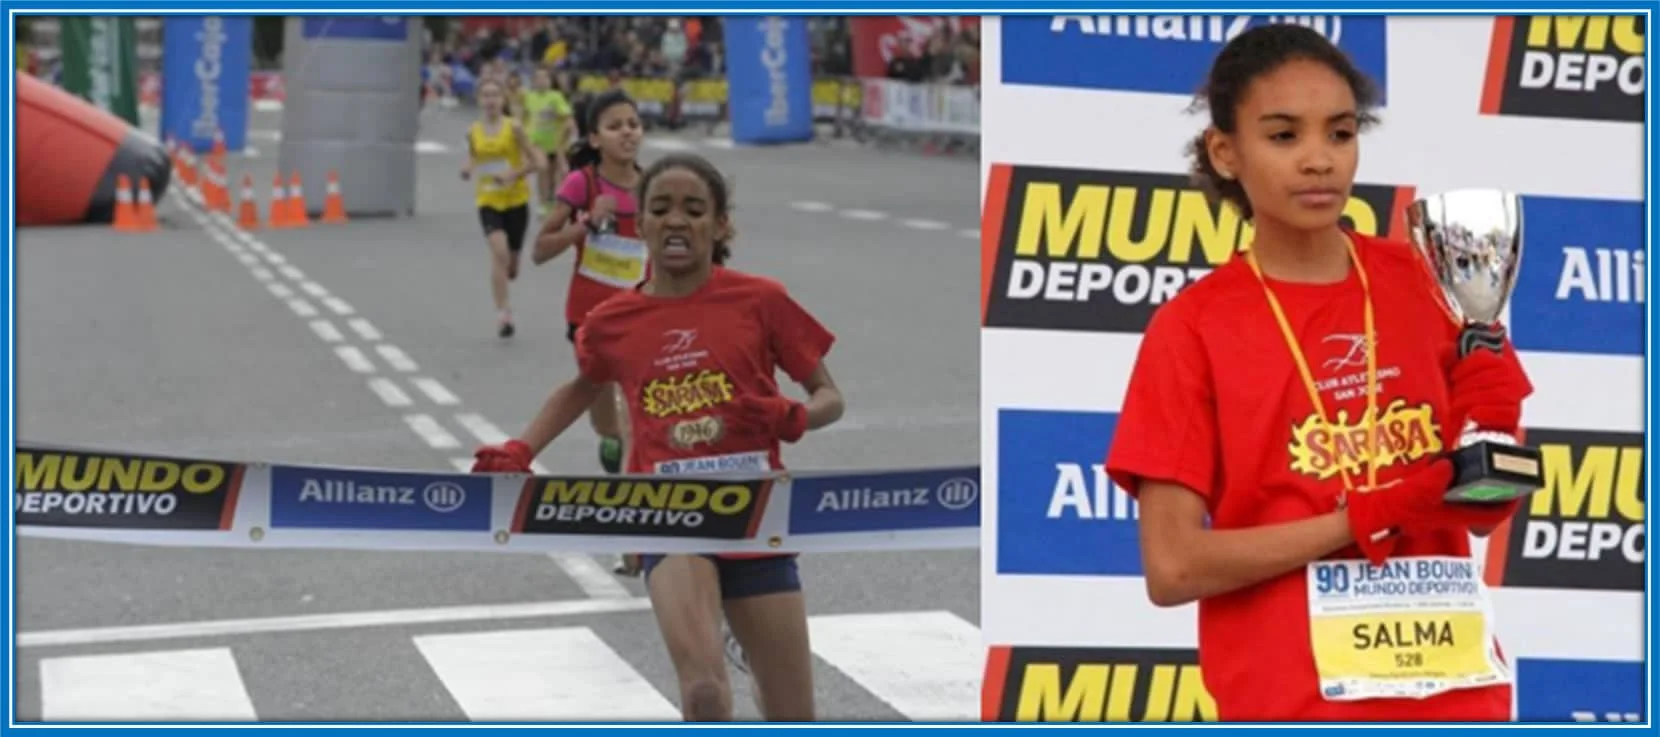 A Rising Star: Salma Paralluelo's Early Triumph in the Jean Bouin Race at Just 8 Years Old. Source: Tour Universo Mujer and MundoDeportivo.